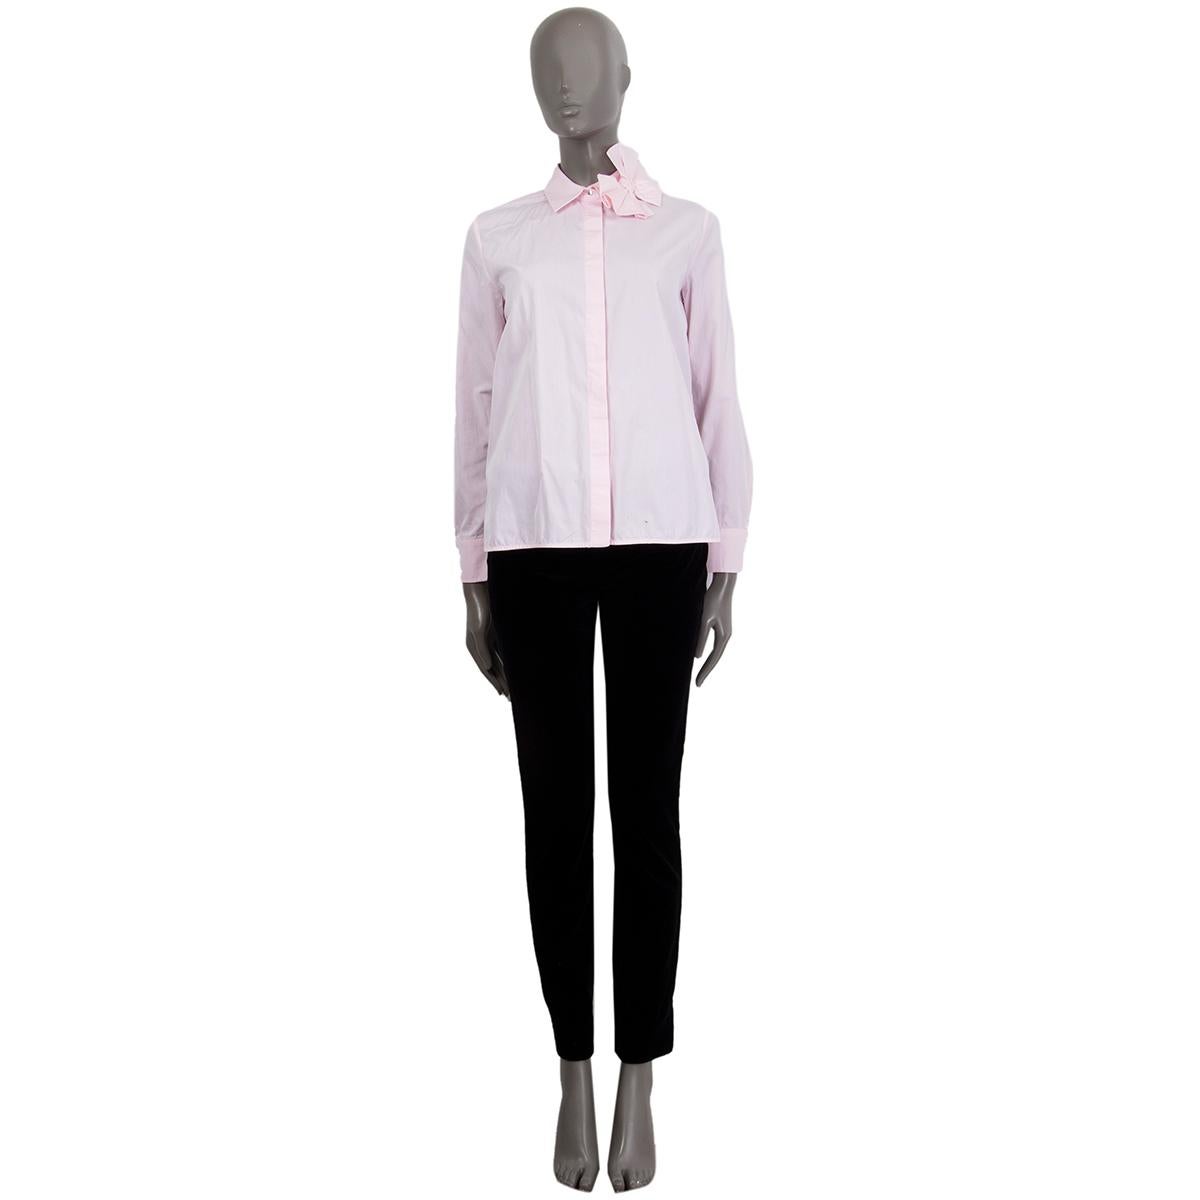 100% authentic Victoria Victoria Beckham bow detail button-up shirt in baby pink cotton (100%) with a flat collar. Has buttoned cuffs. Closes on the front with buttons. Unlined. Has been worn and is in excellent condition. 

Measurements
Tag